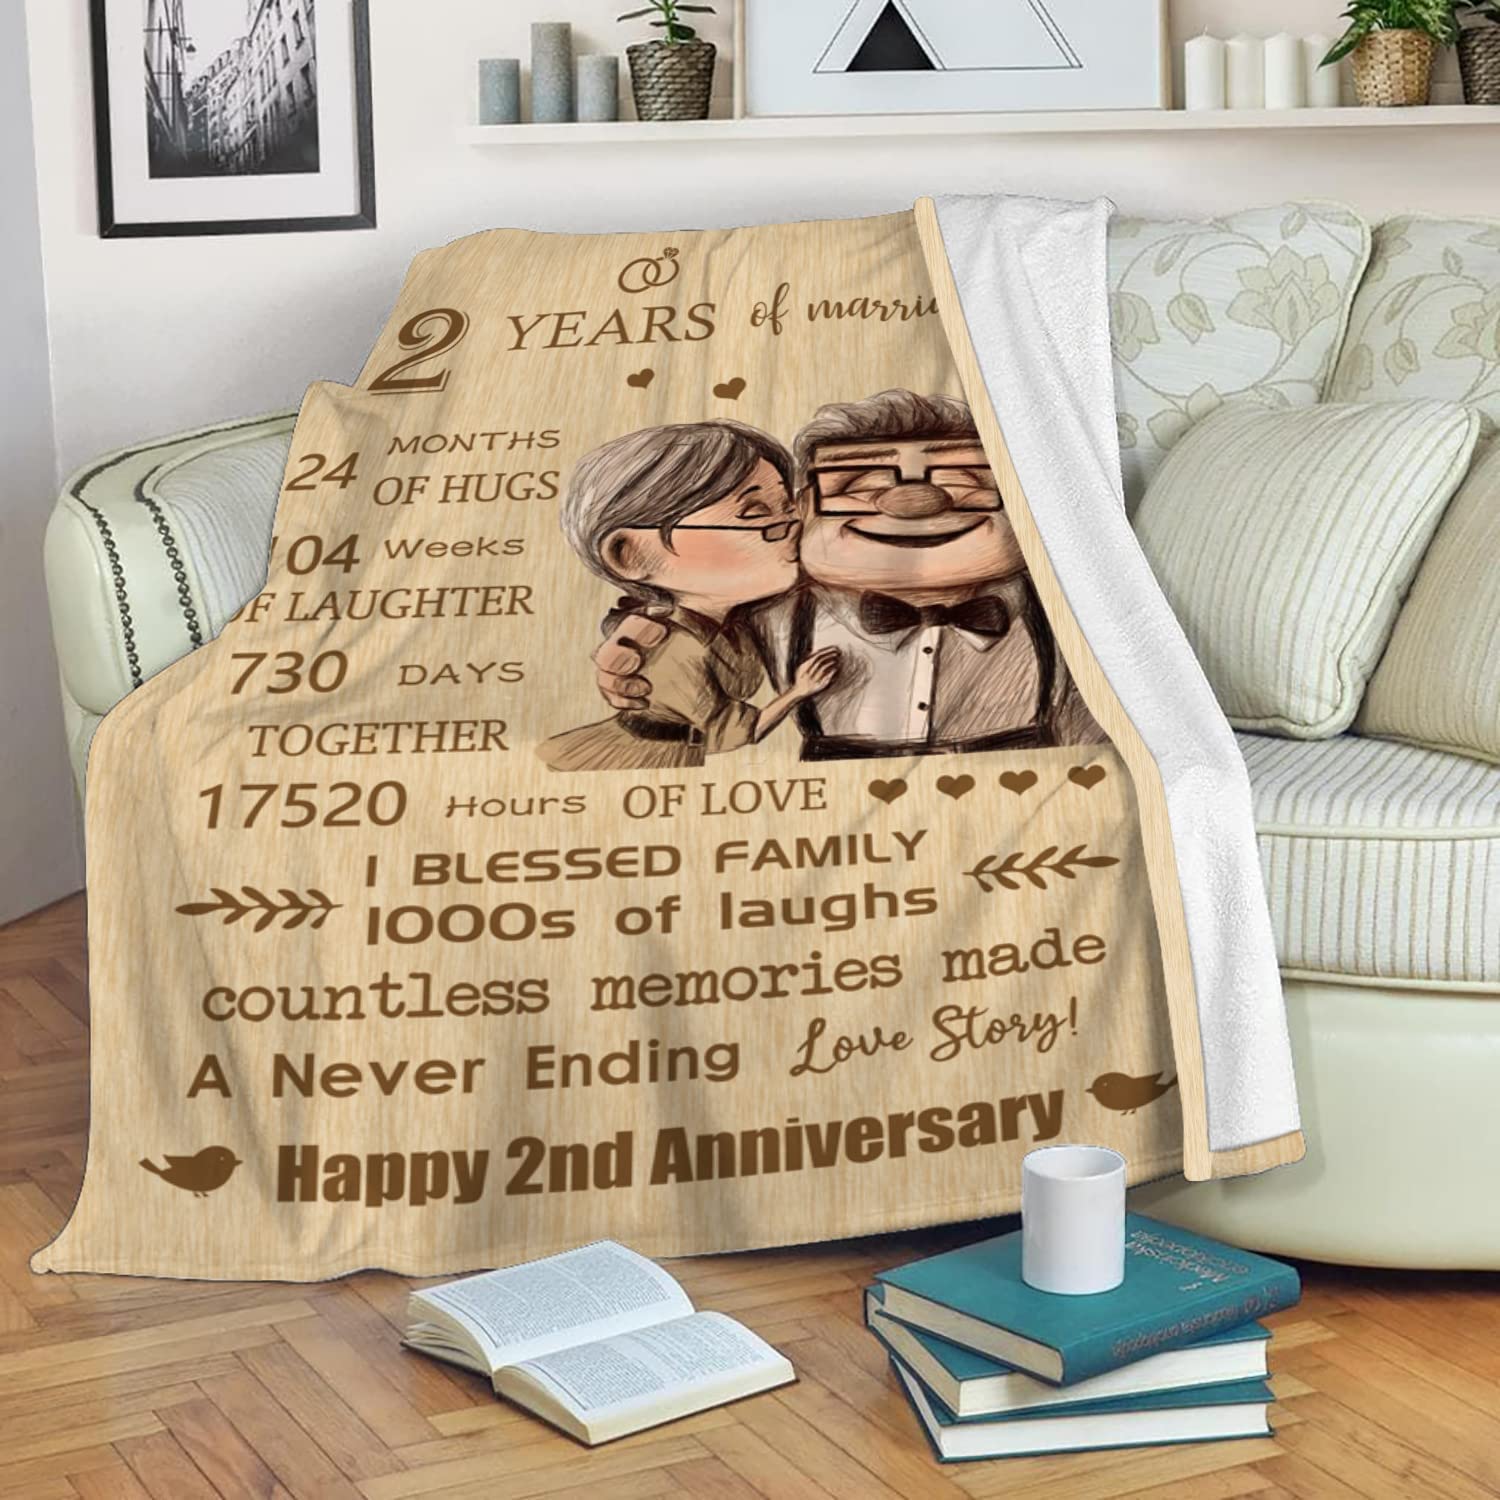 2nd Anniversary Blanket Gifts Wedding for 2nd, 2 Years of Marriage Gift for Wife, Parents, Friends 2nd Wedding Idea Valentine's Day Gift Idea